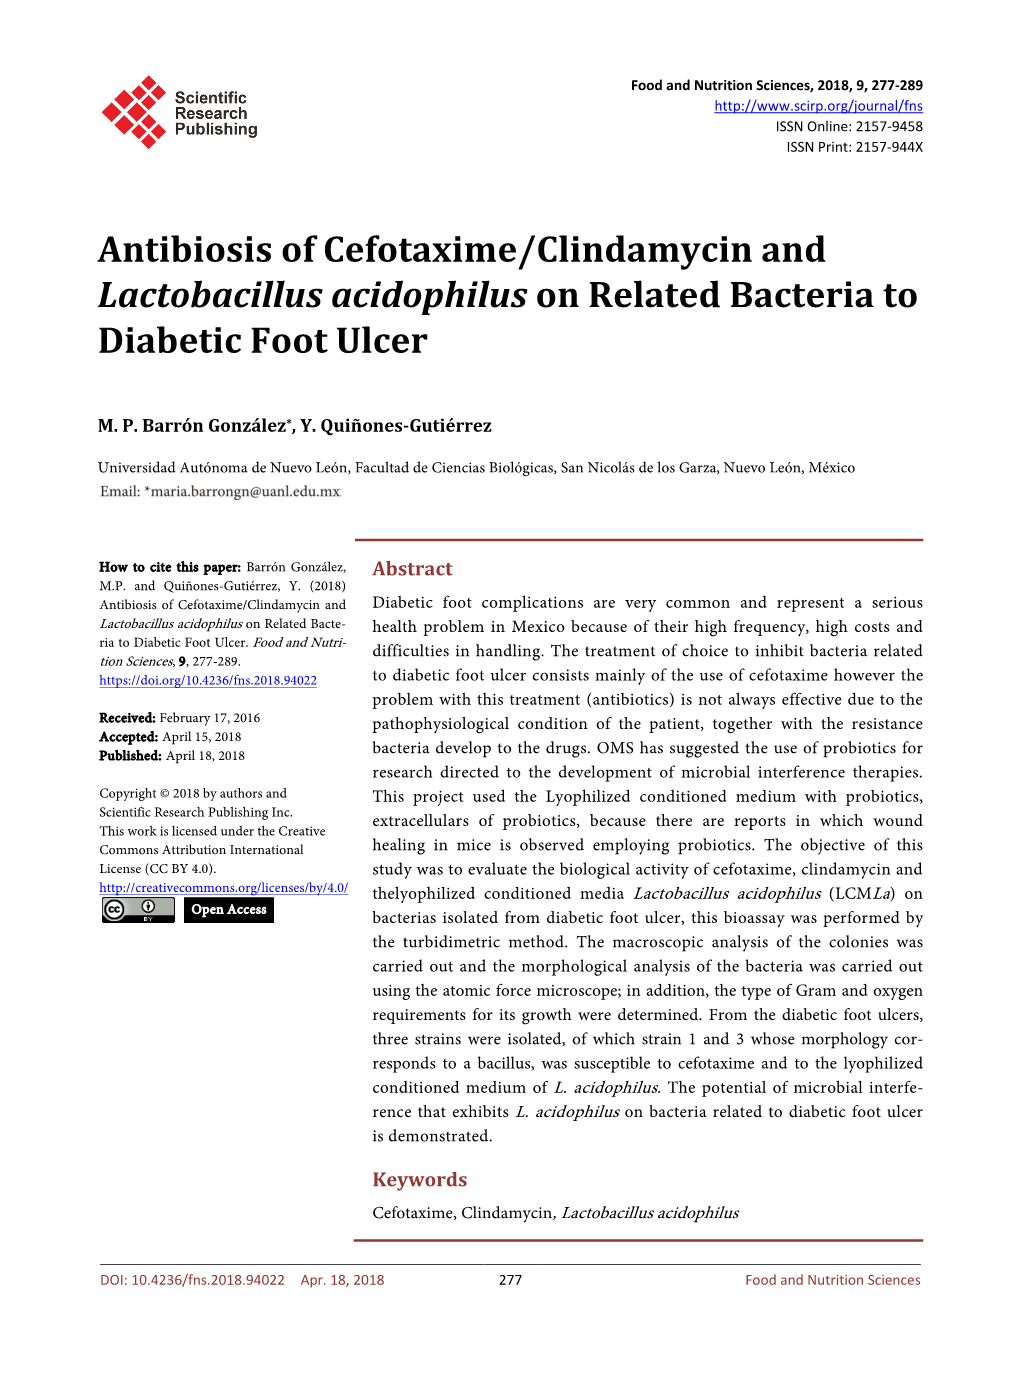 Antibiosis of Cefotaxime/Clindamycin and Lactobacillus Acidophilus on Related Bacteria to Diabetic Foot Ulcer